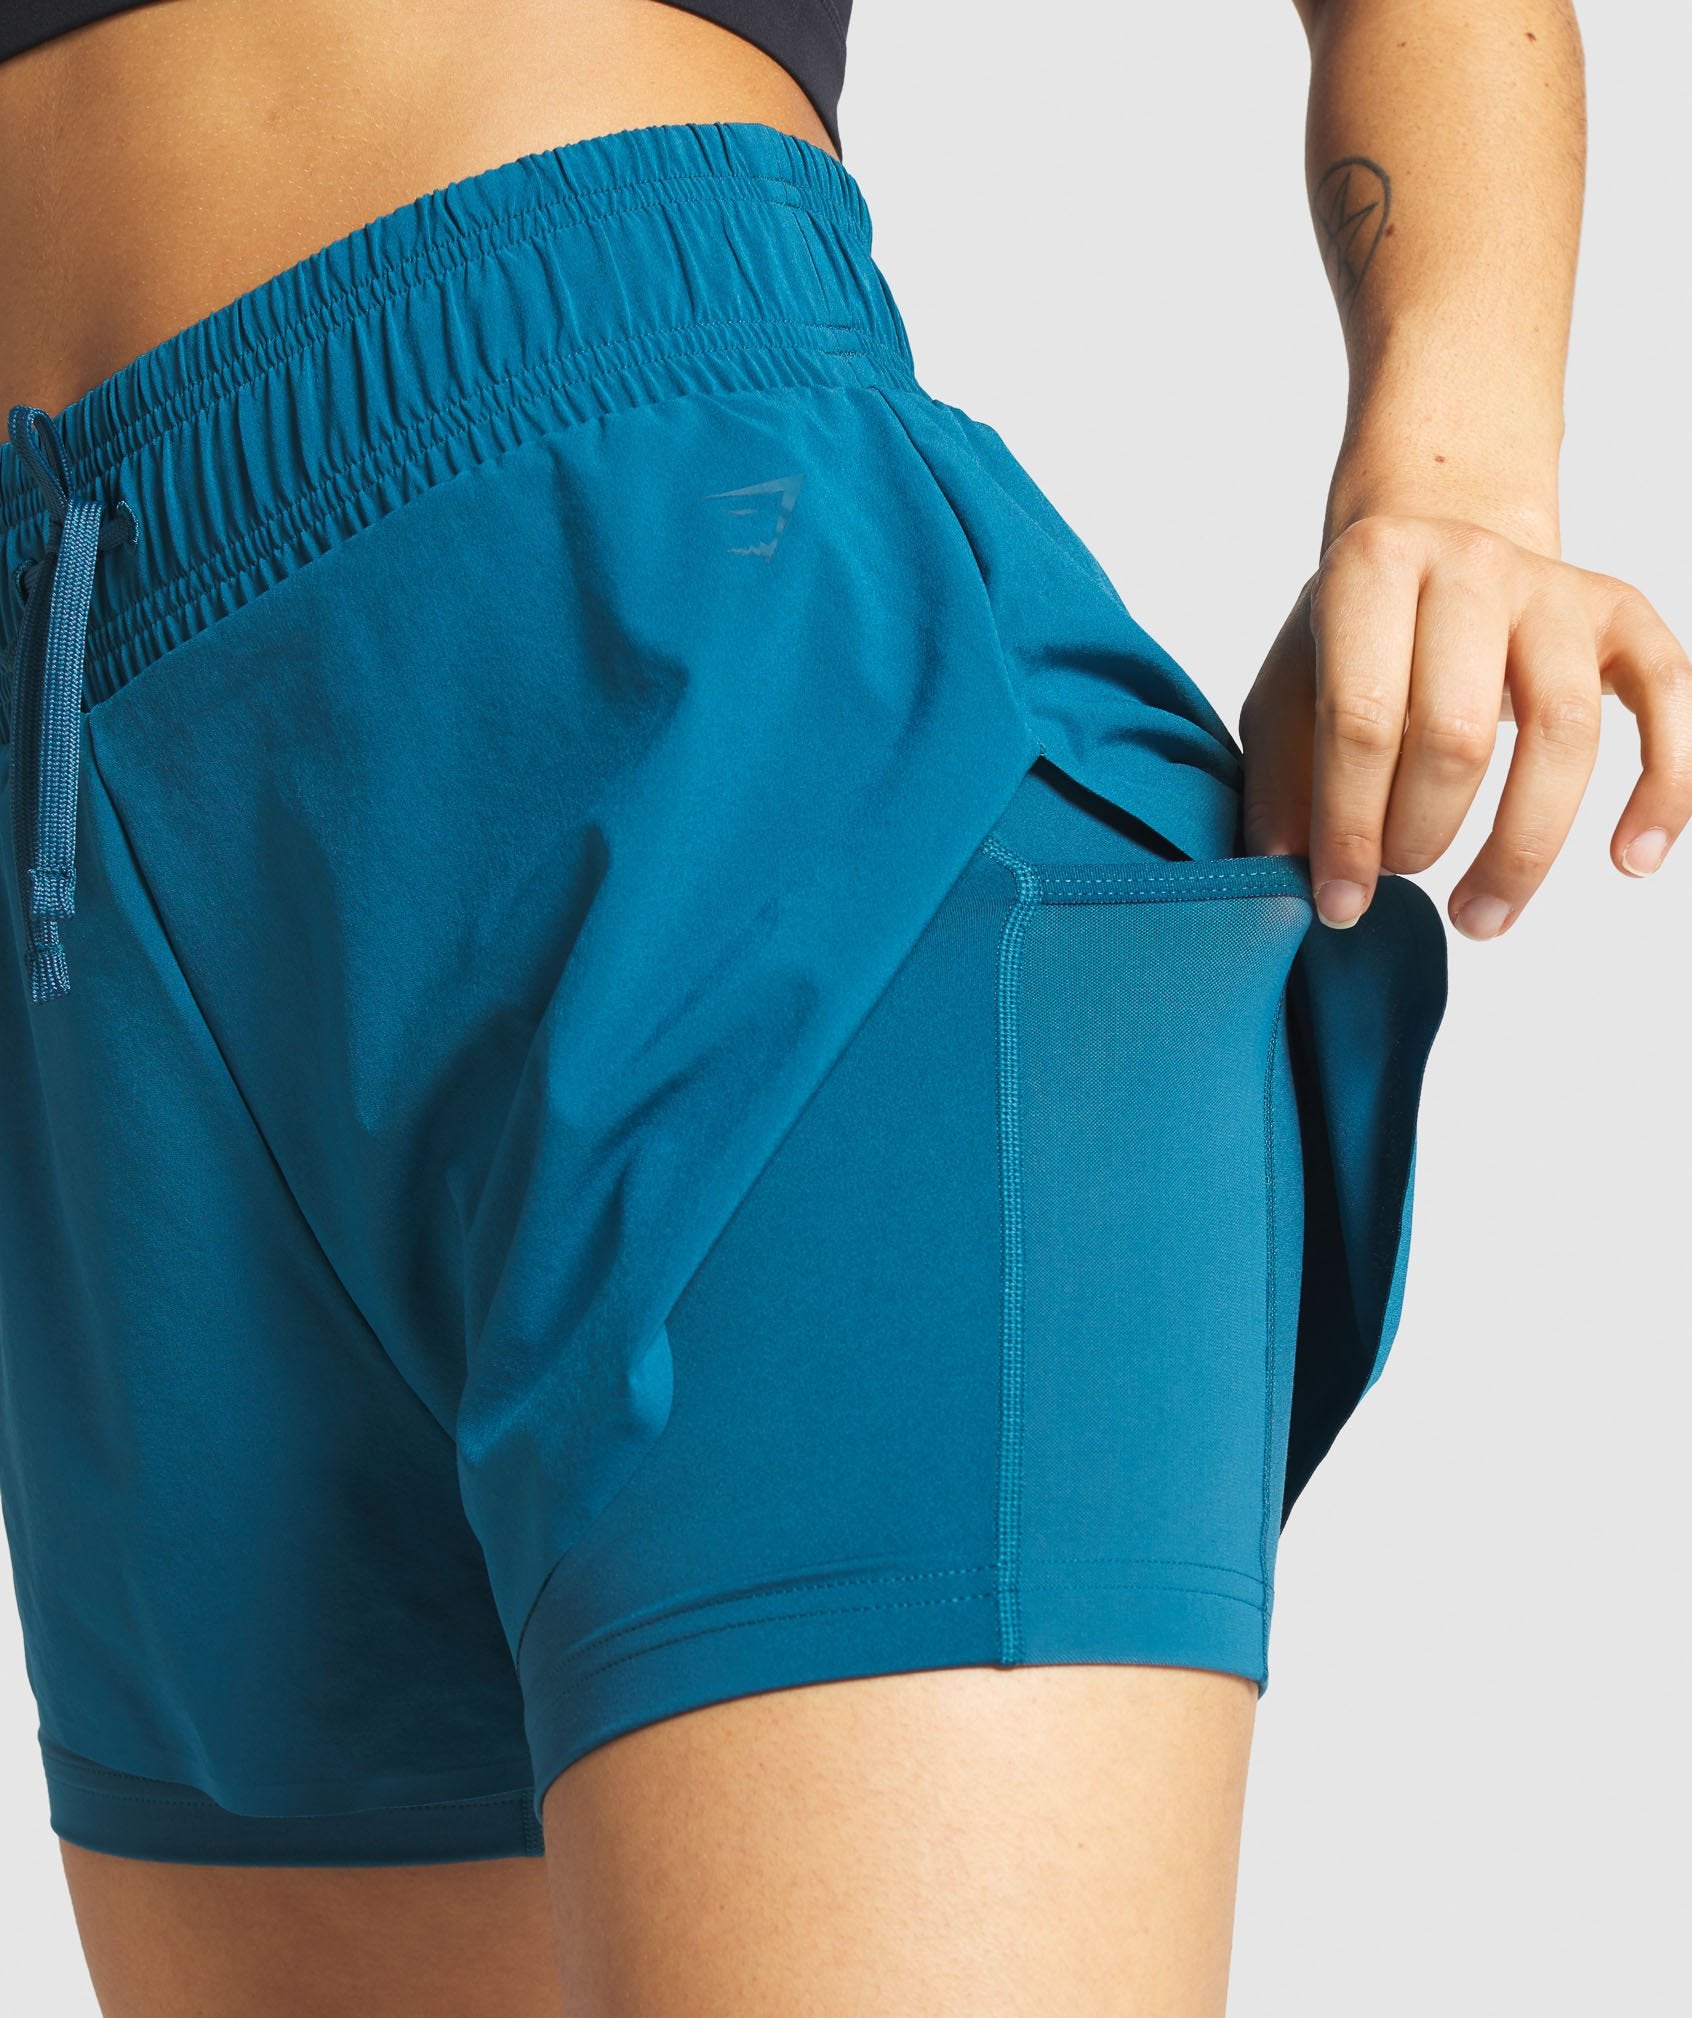 Speed Shorts in Teal